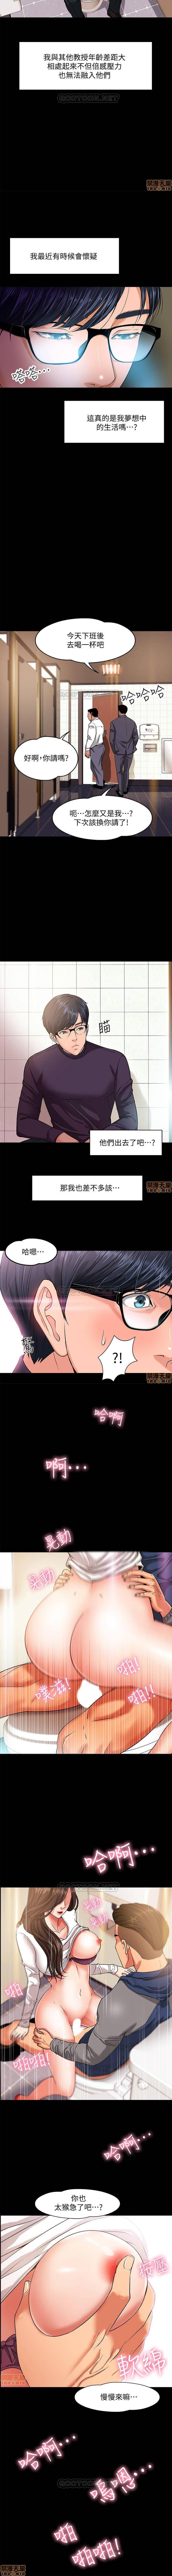 PROFESSOR, ARE YOU JUST GOING TO LOOK AT ME? | DESIRE SWAMP | 教授，你還等什麼? Ch. 1 [Chinese] Manhwa 